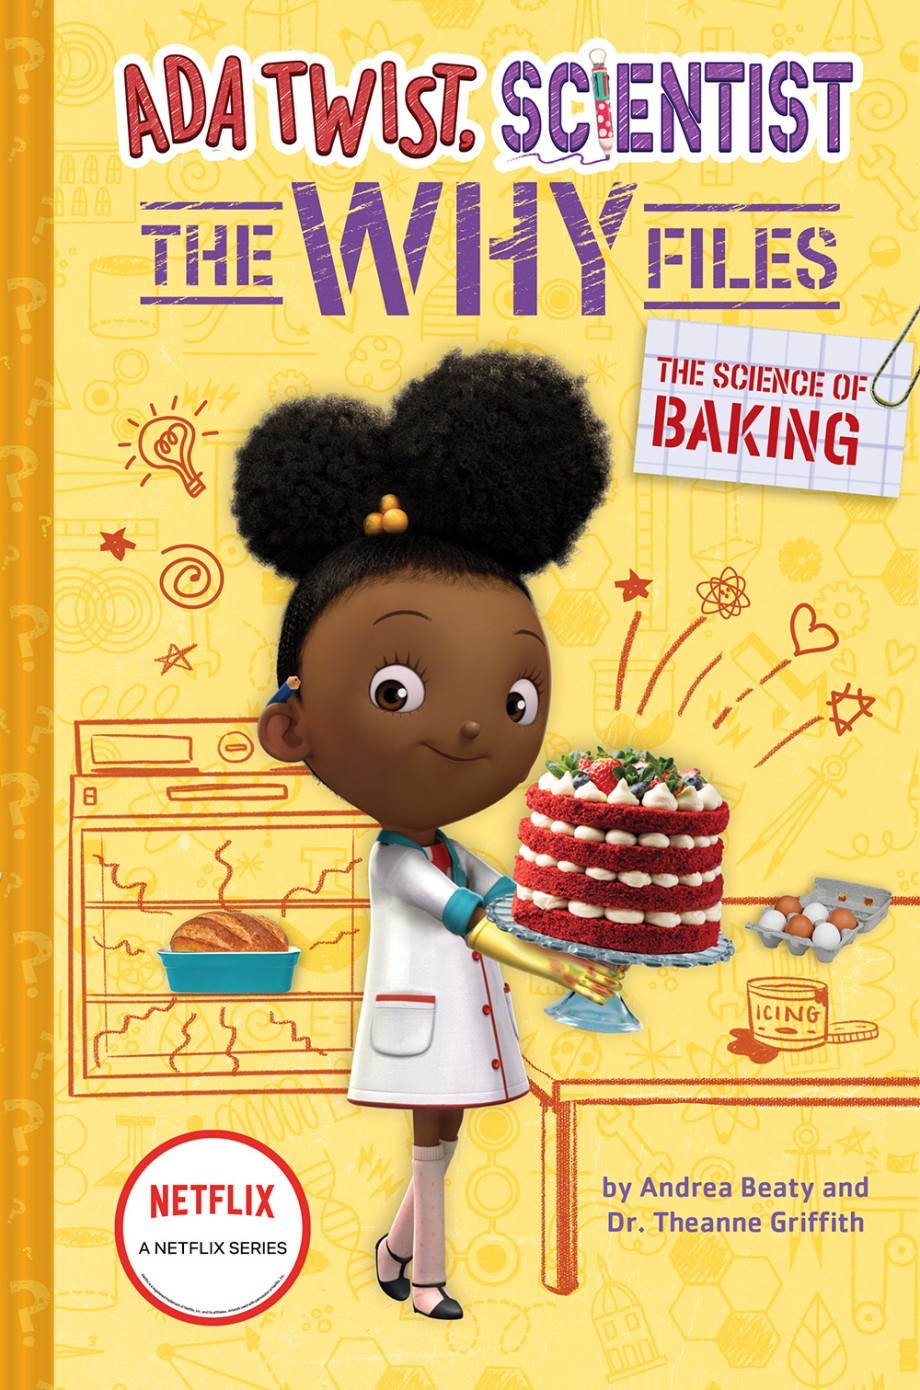 The Perfect Science of Baking Cookies: Make Kid Scientists in Your